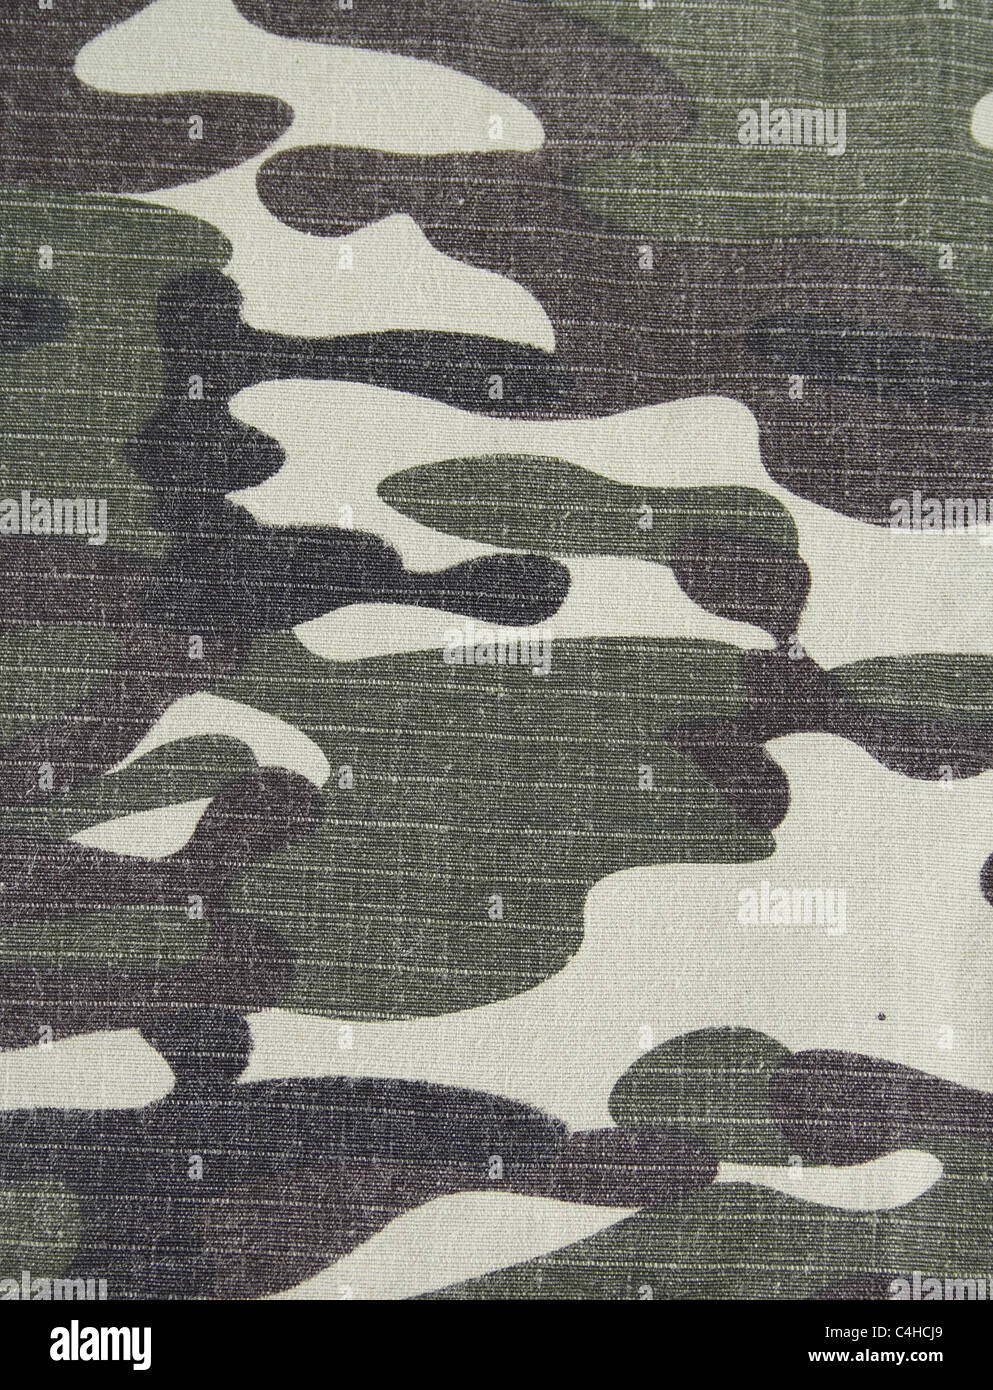 Camouflage-Military Texture Stock Photo